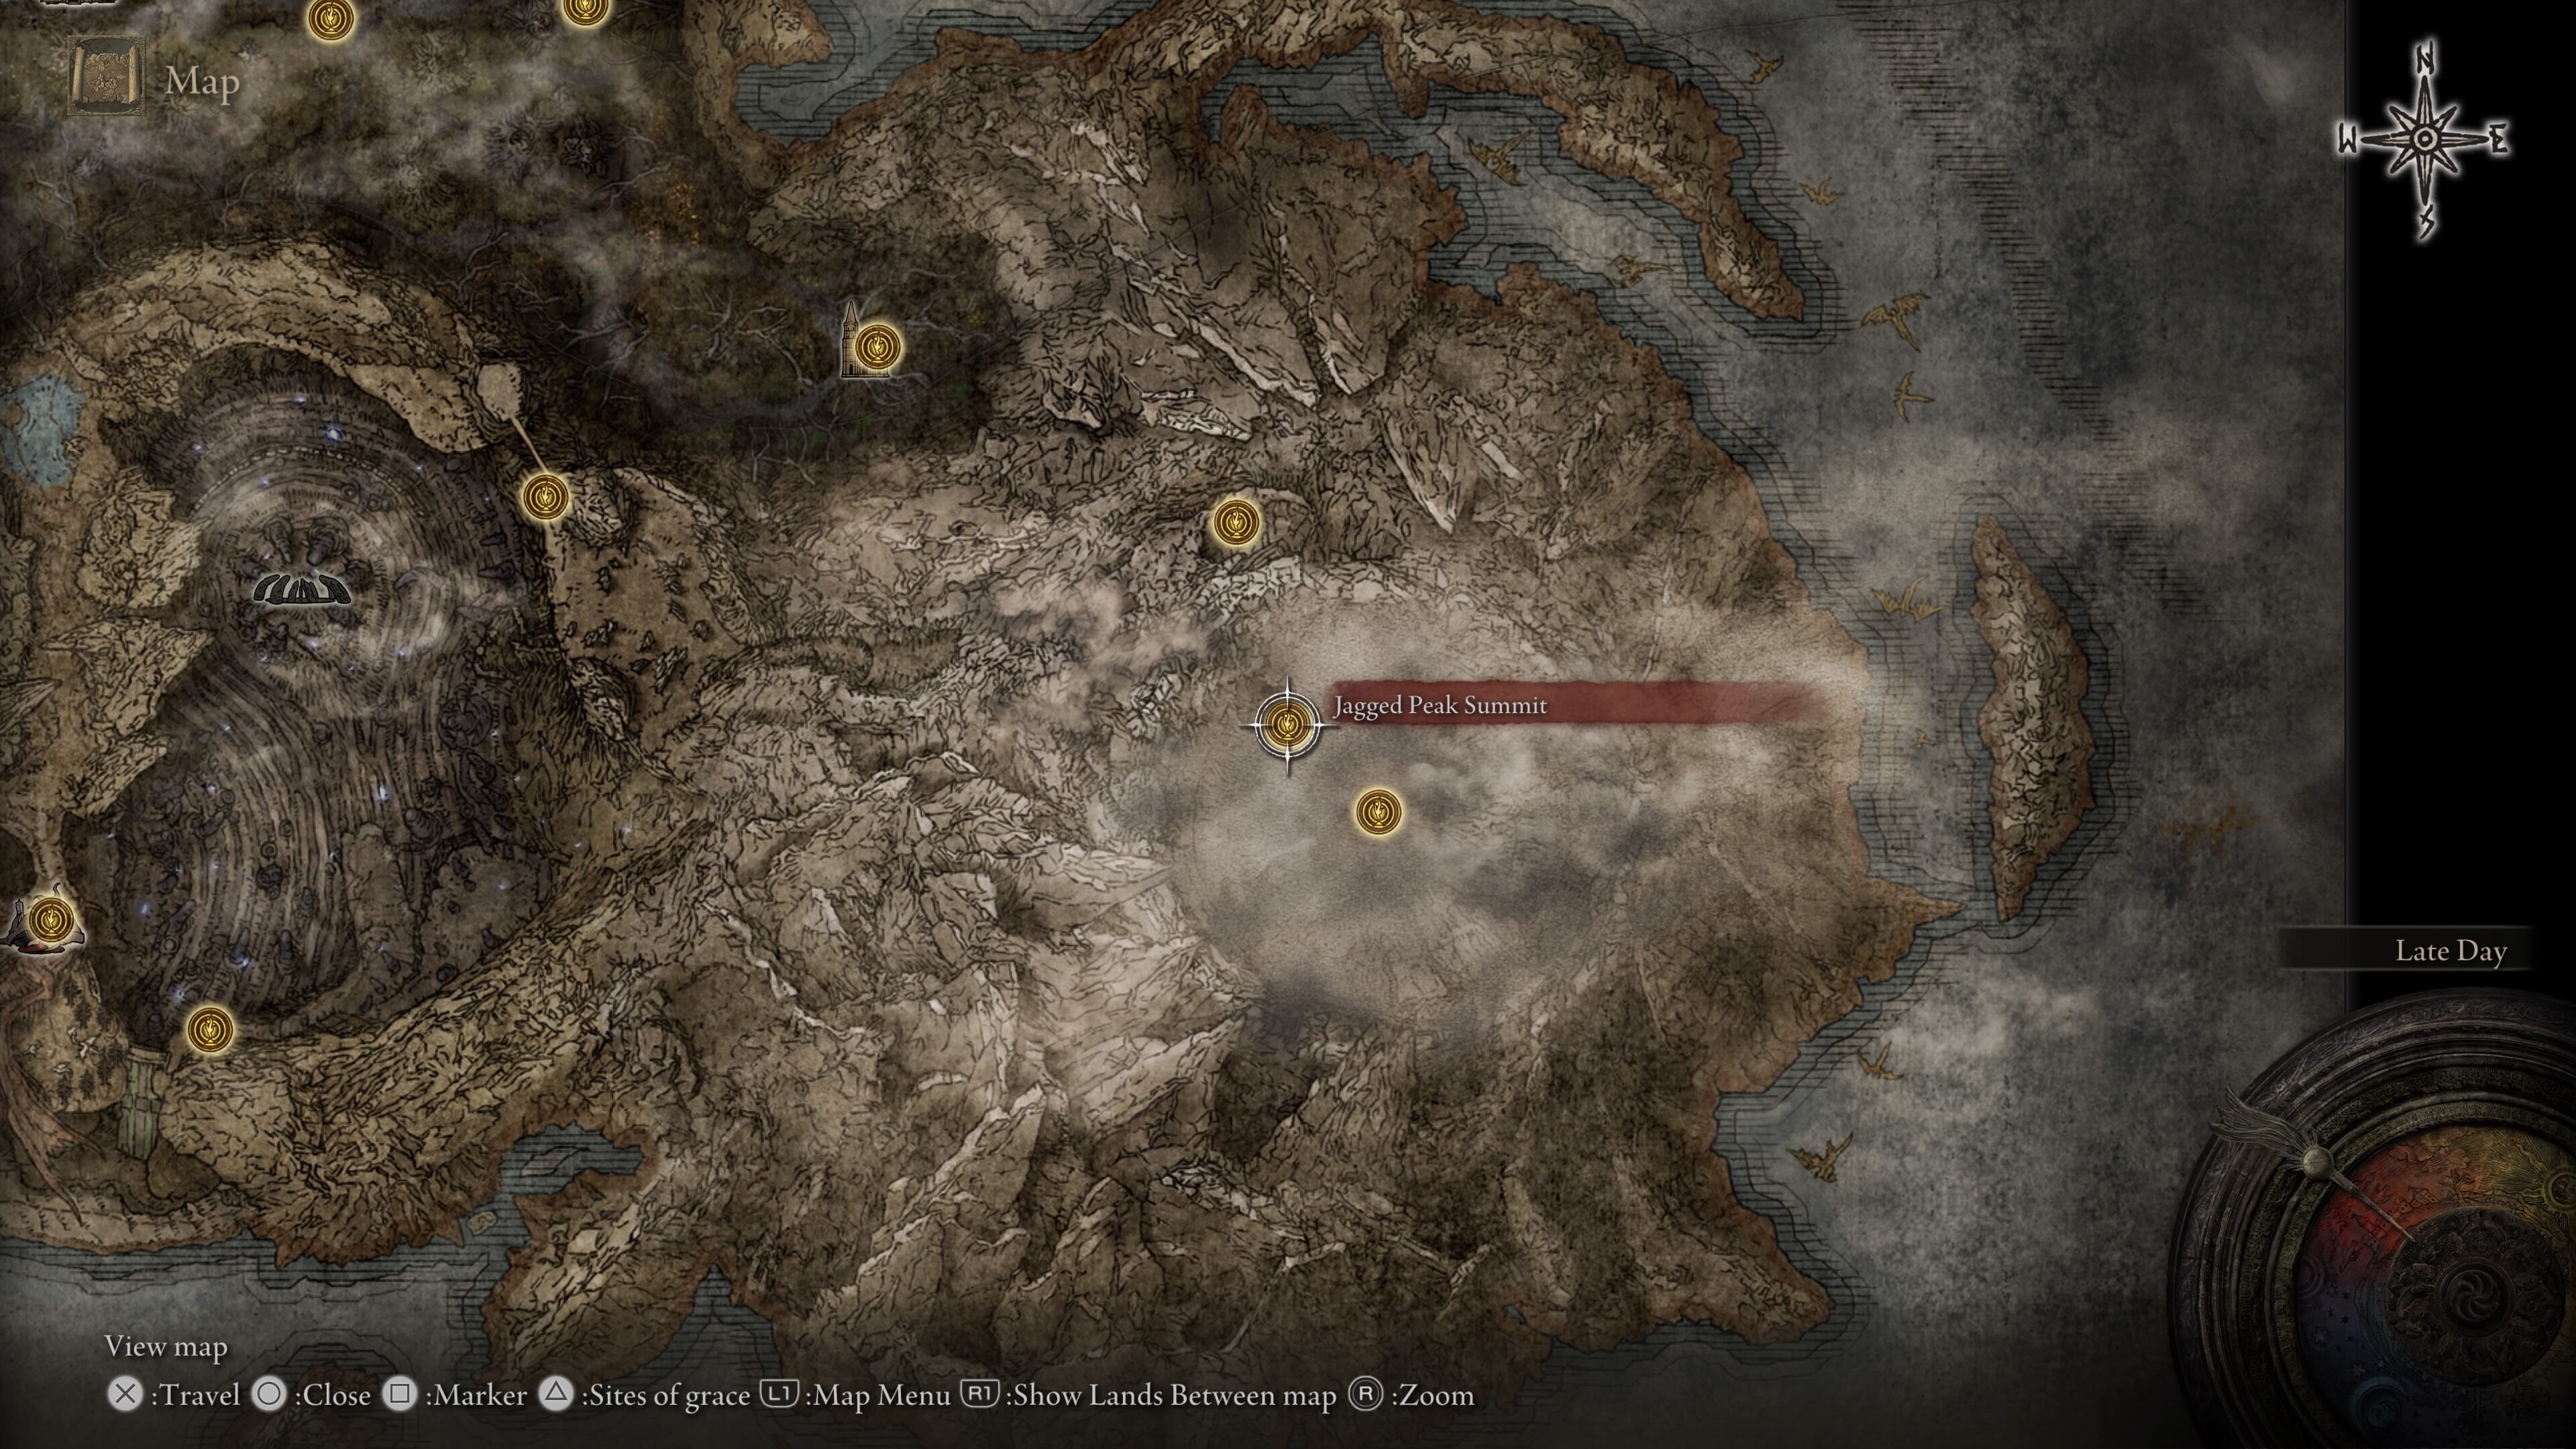 Elden Ring Shadow of the Erdtree bayle the dread boss guide - the map of the jagged peak, where bayle is found